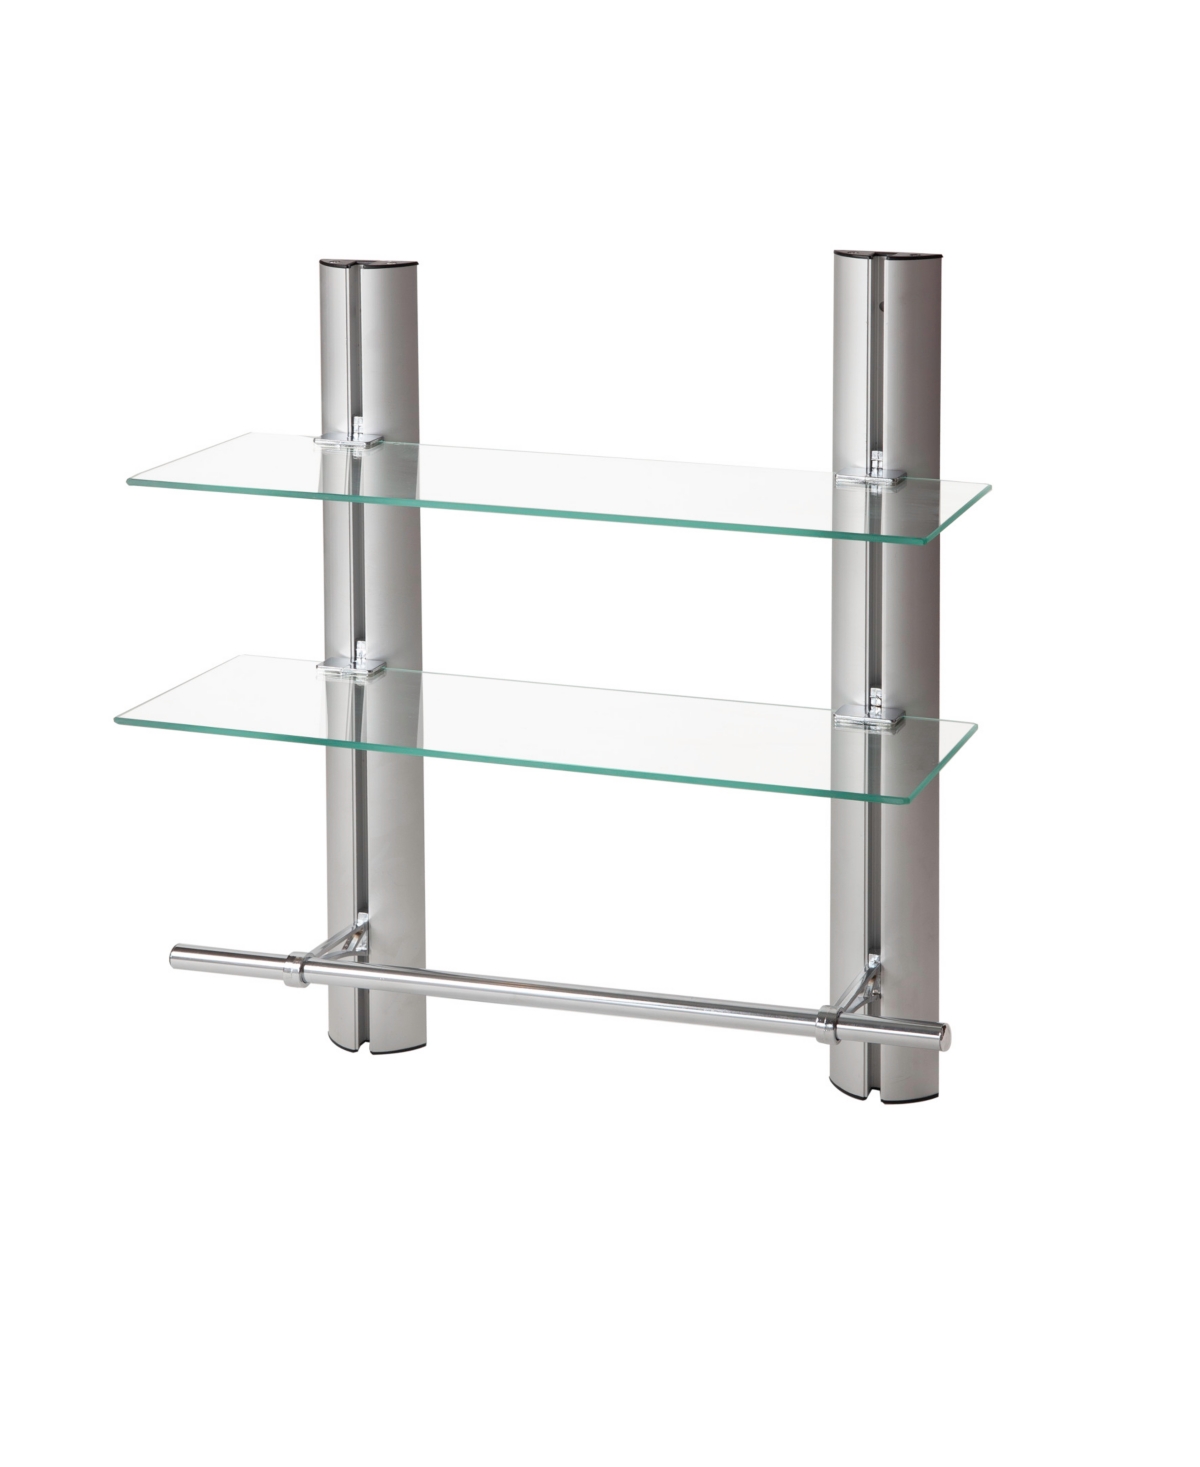 2 Tier Adjustable Glass Shelf with Aluminum Frame and towel Bar - Silver, Clear